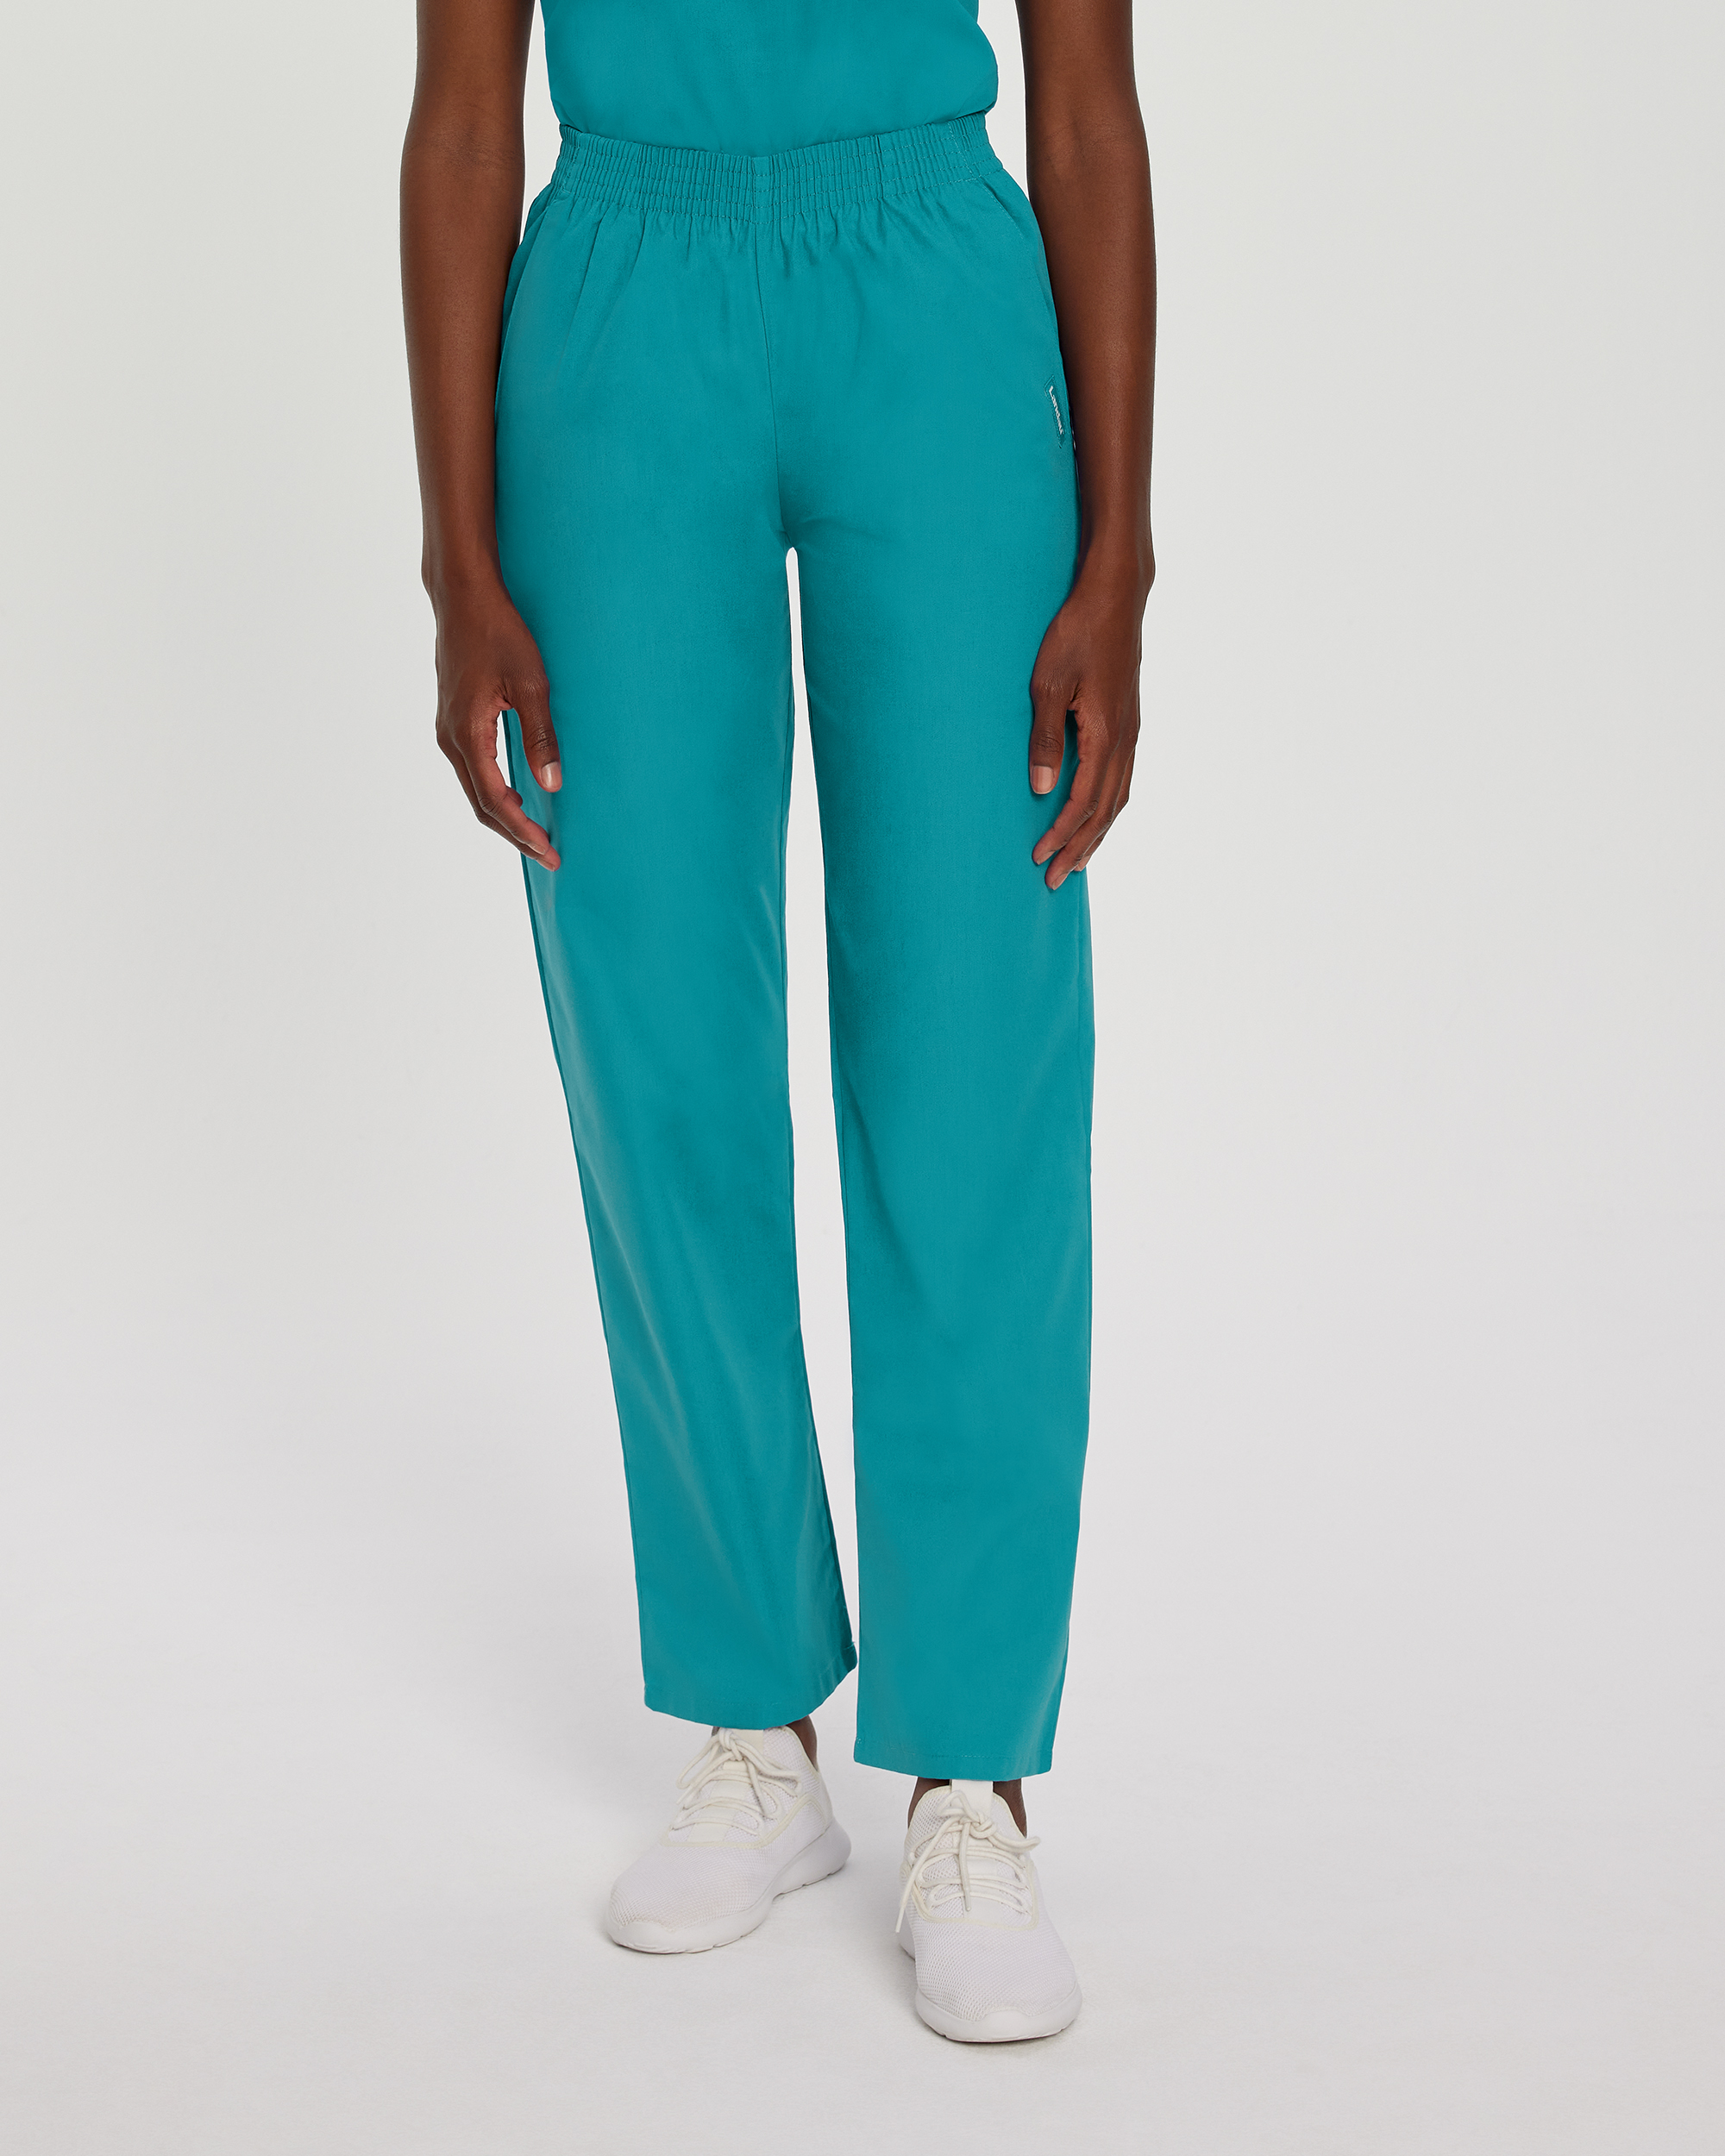 Are these scrub pants breathable?